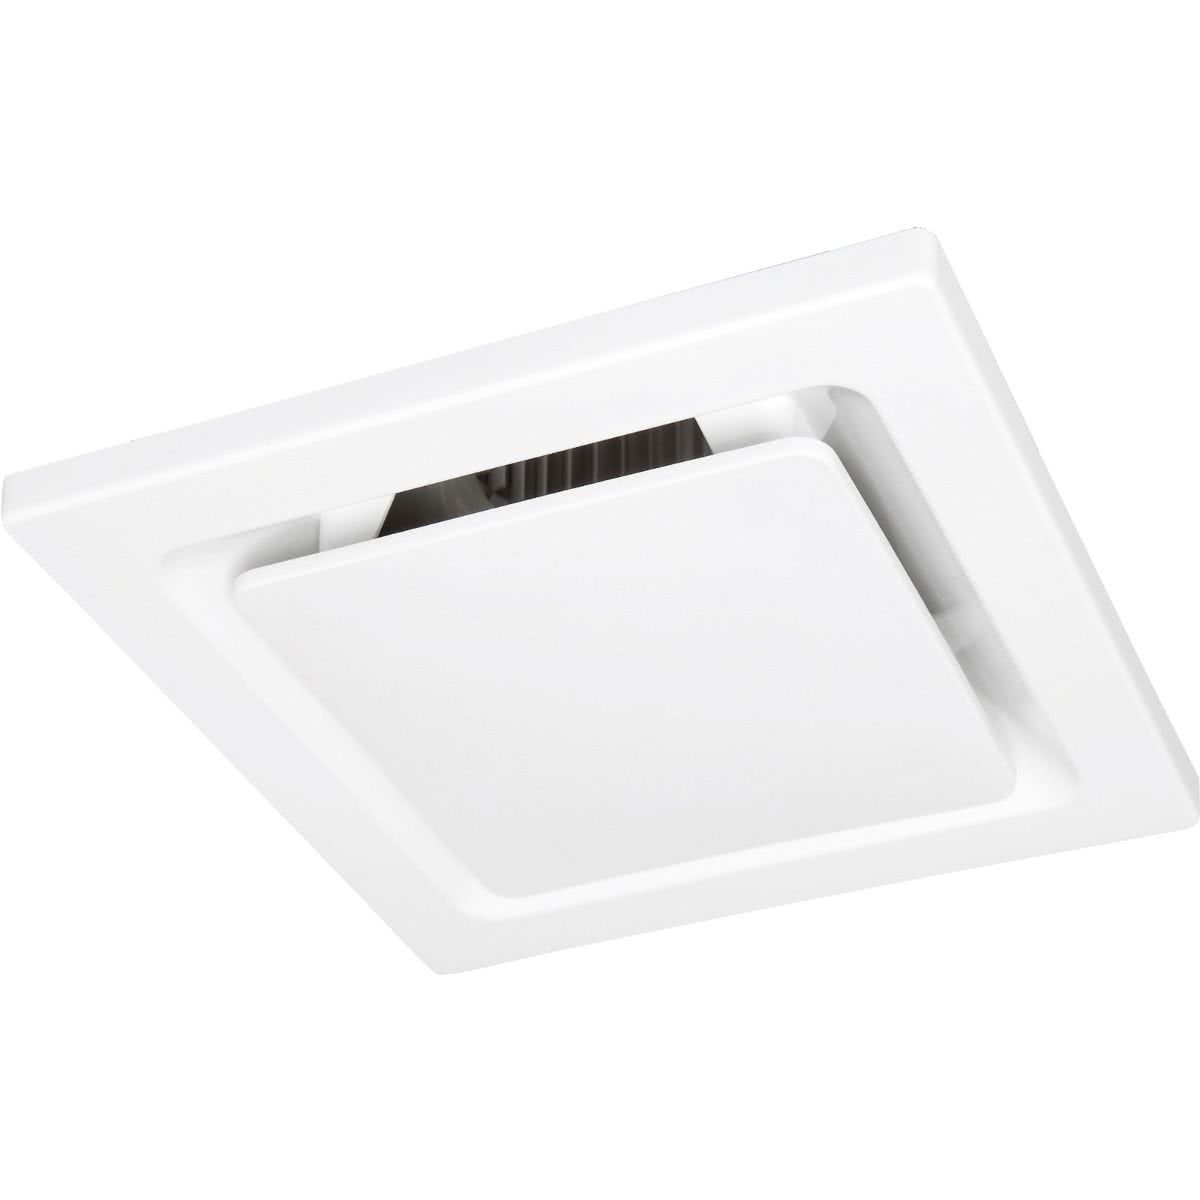 Sarico Ii Large Square Exhaust Fan